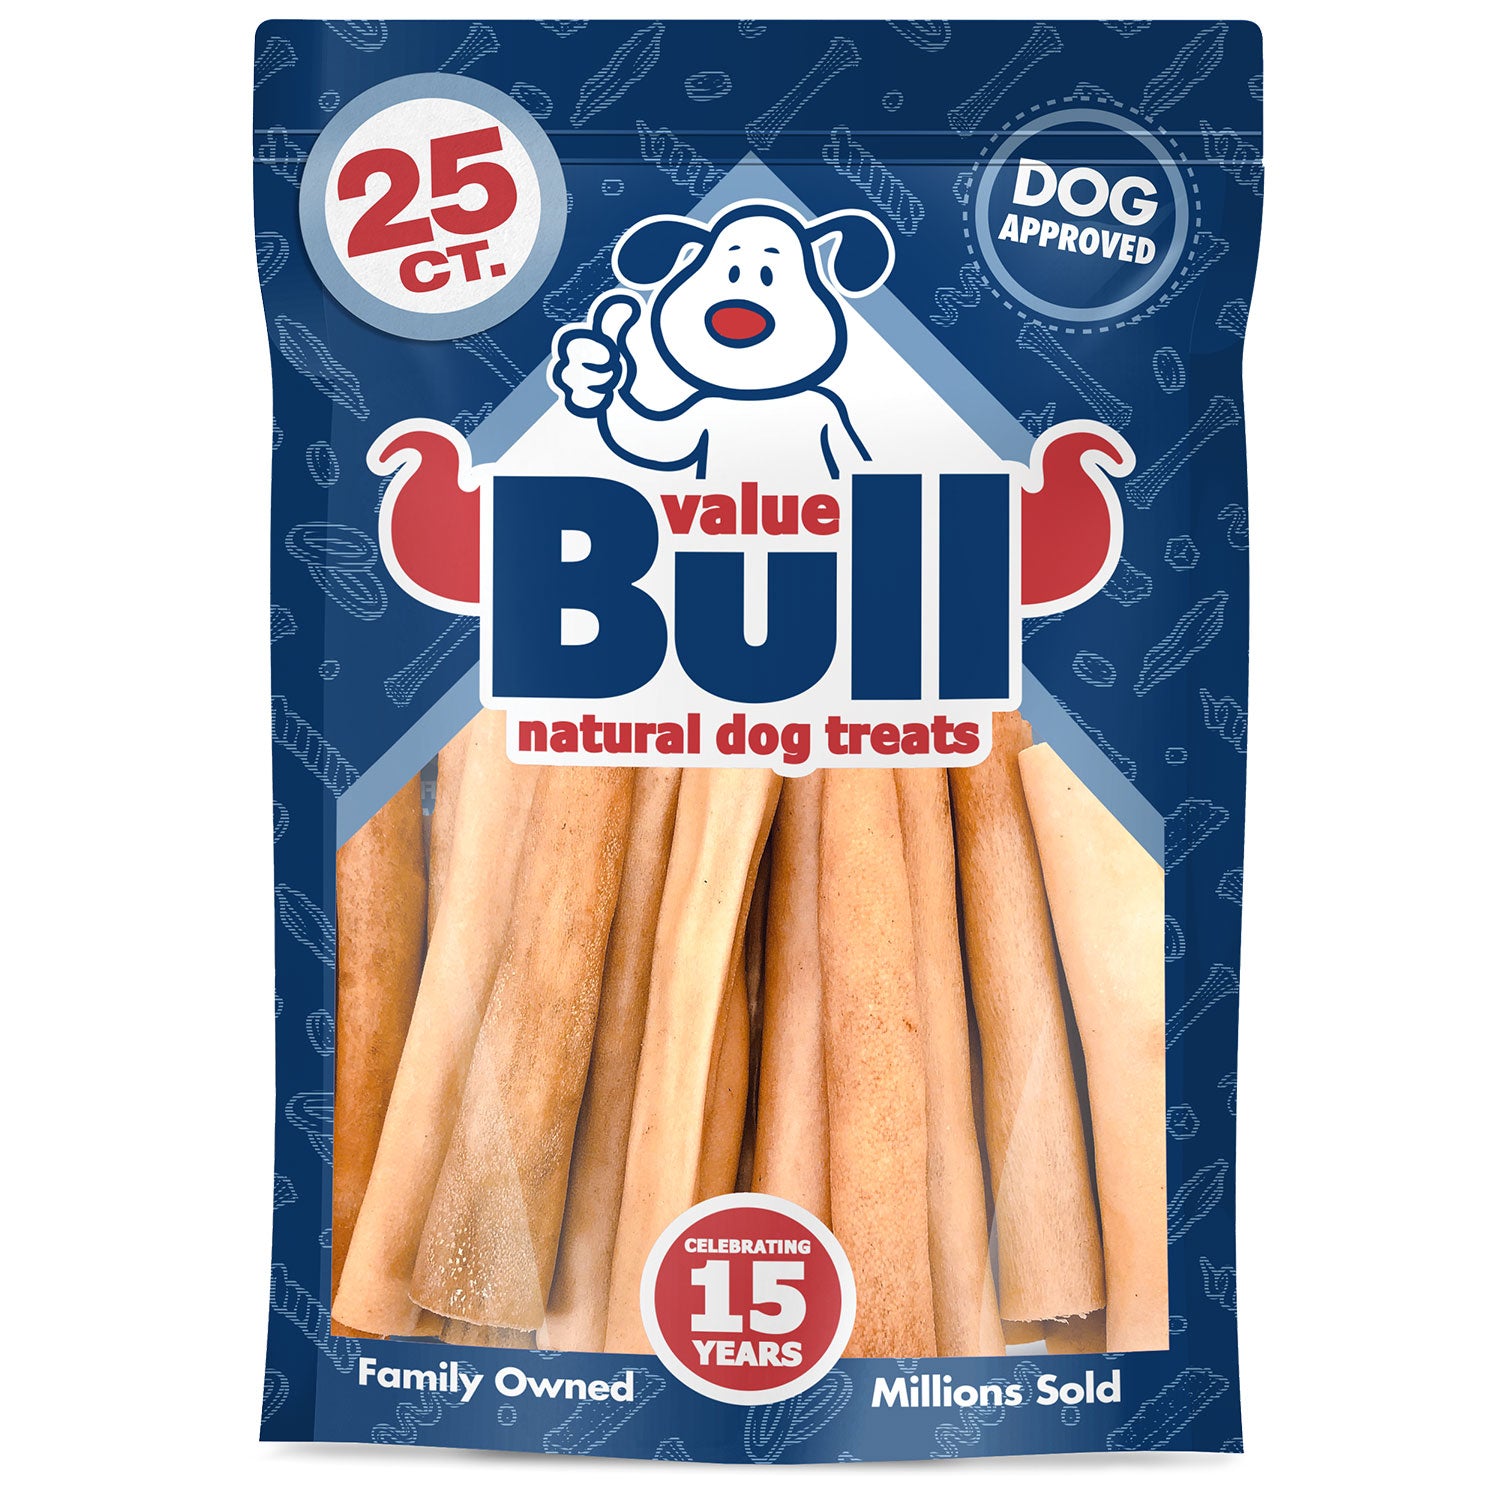 ValueBull Premium Cow Tails, Natural Dog Treats, Regular, 6 Inch, 25 Count